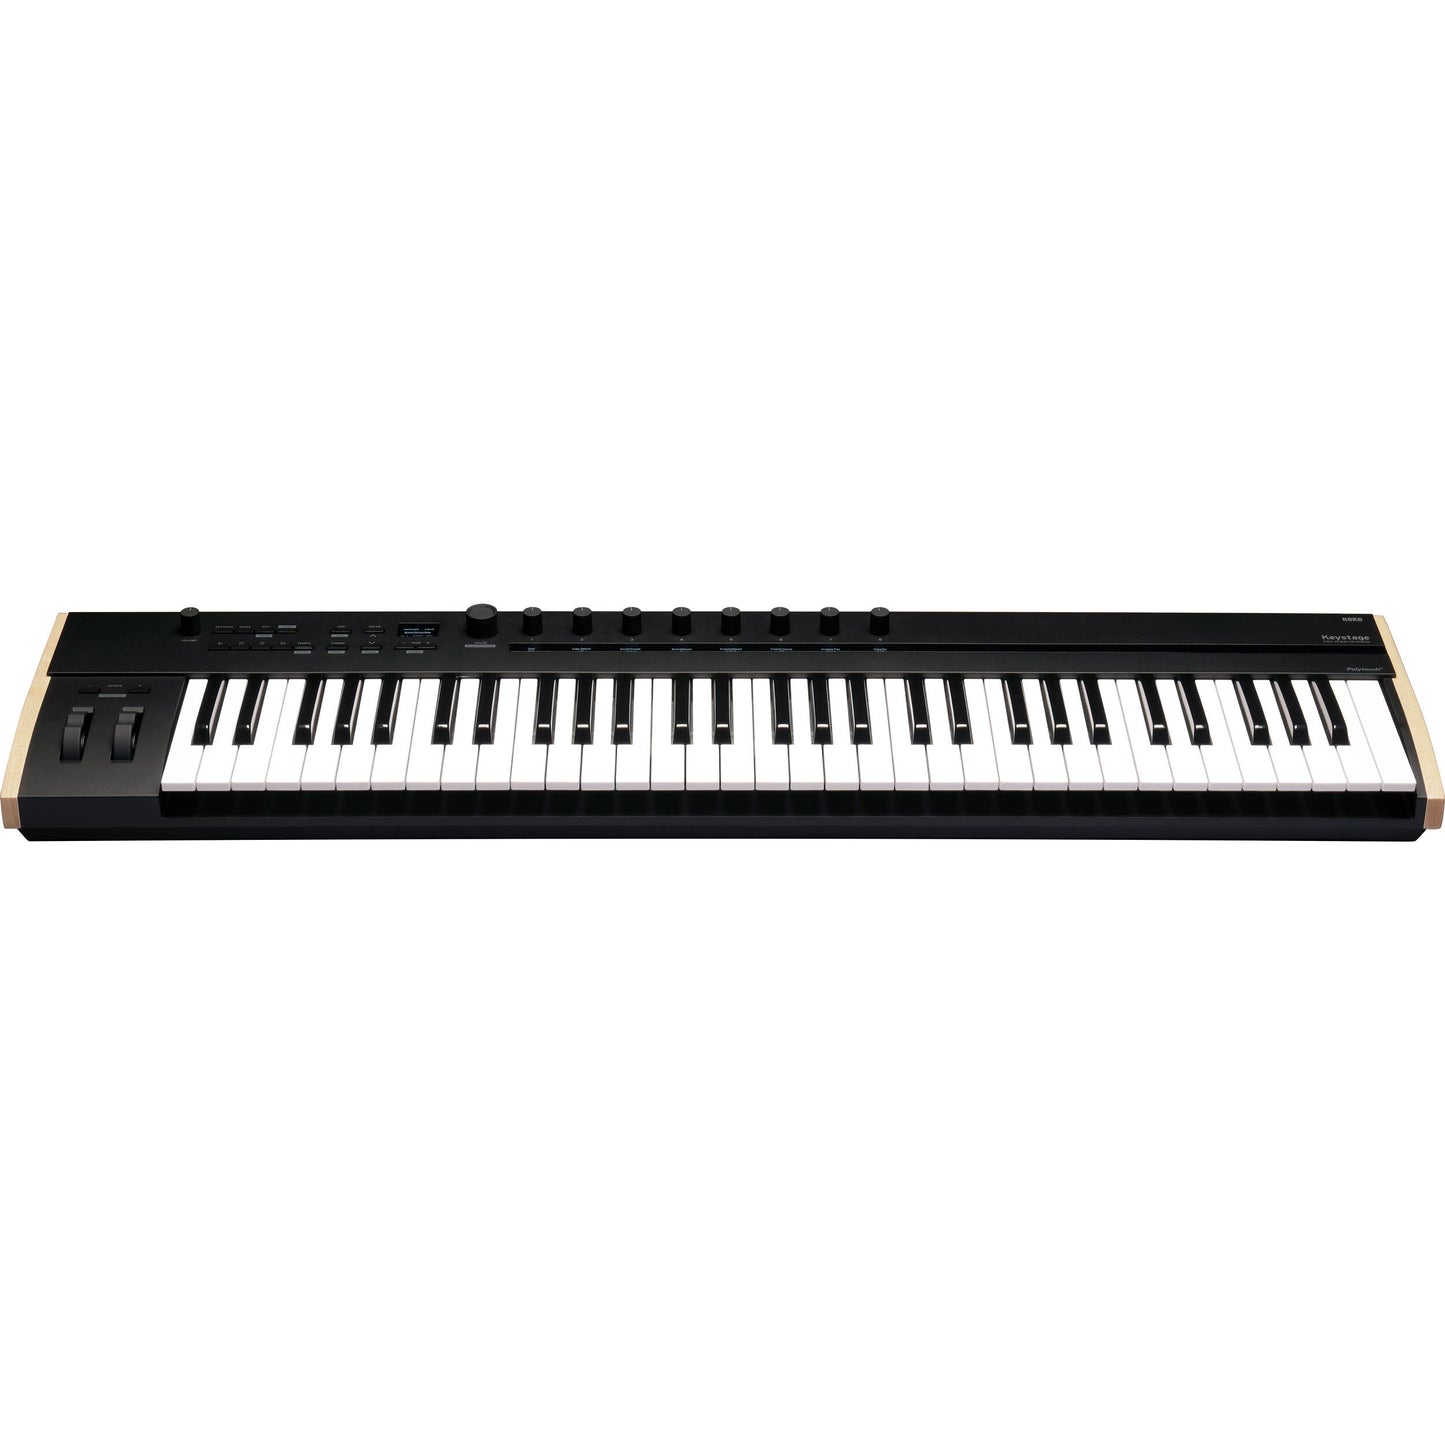 Korg Keystage 61 MIDI Controller with Polyphonic Aftertouch